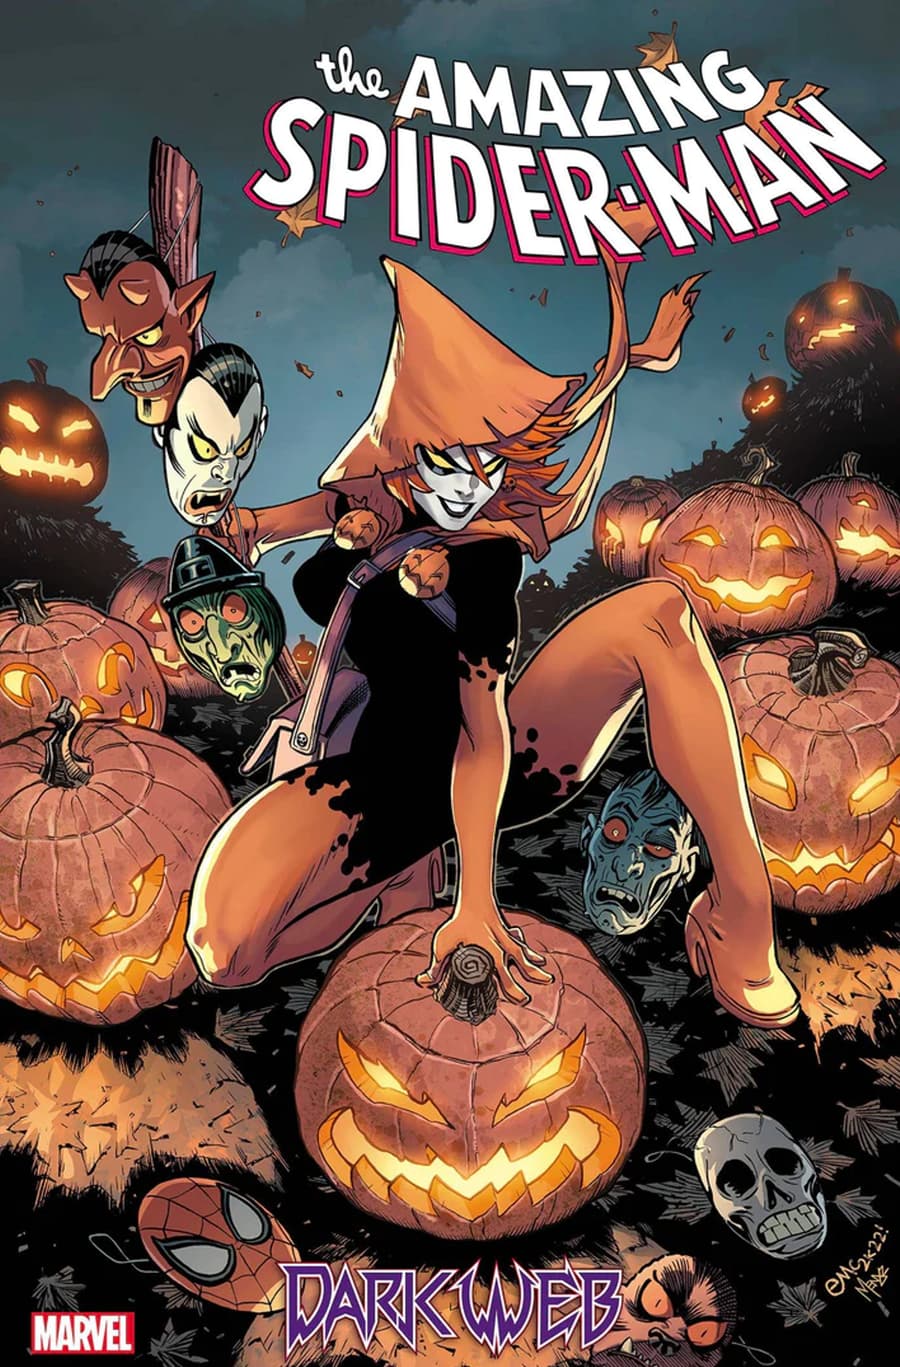 HALLOW'S EVE #1 Art by MICHAEL DOWNLING